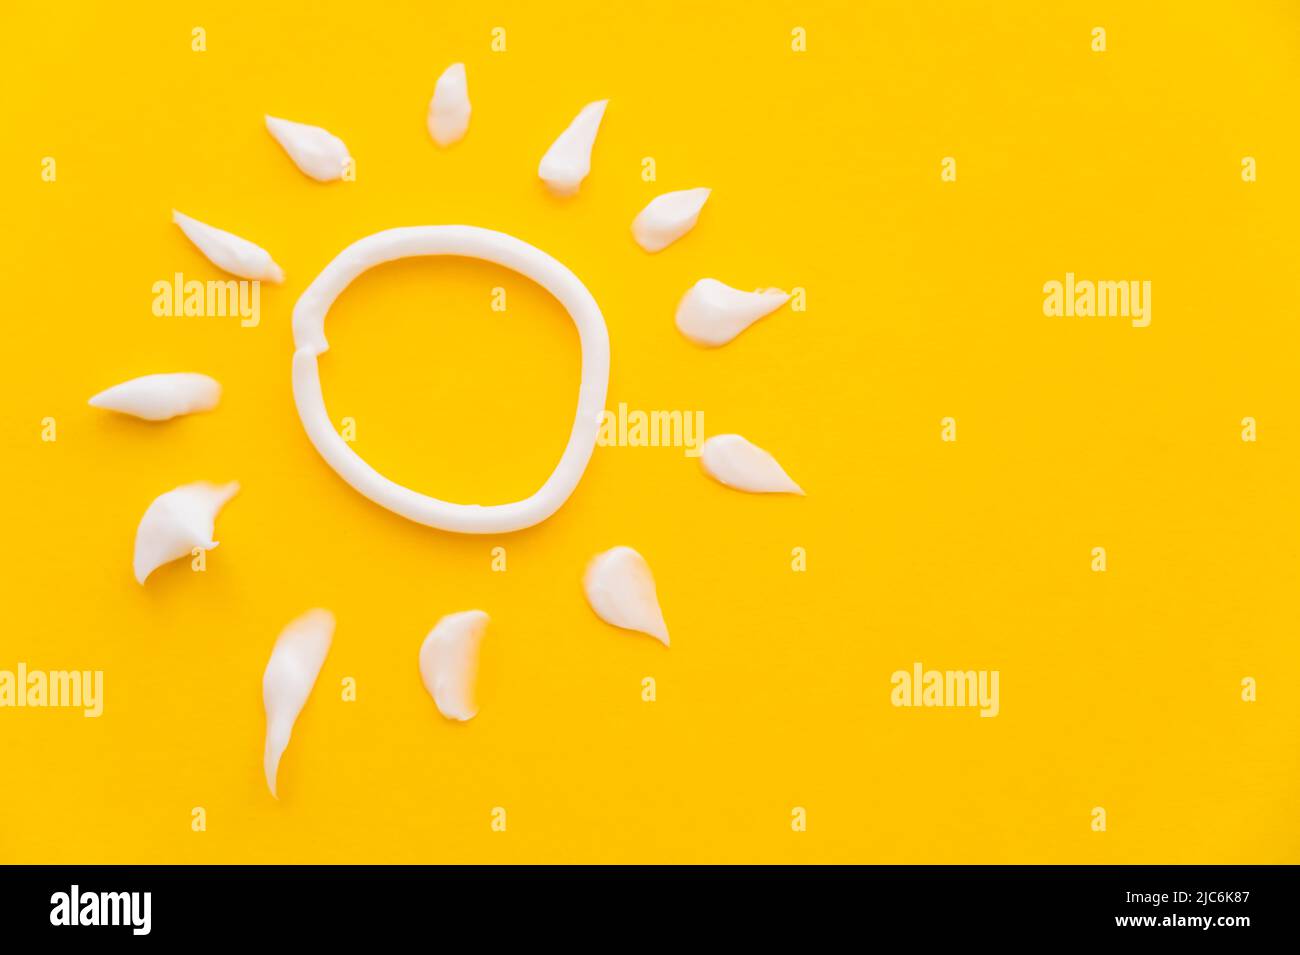 Top view of sun sign from sunscreen on yellow background Stock Photo